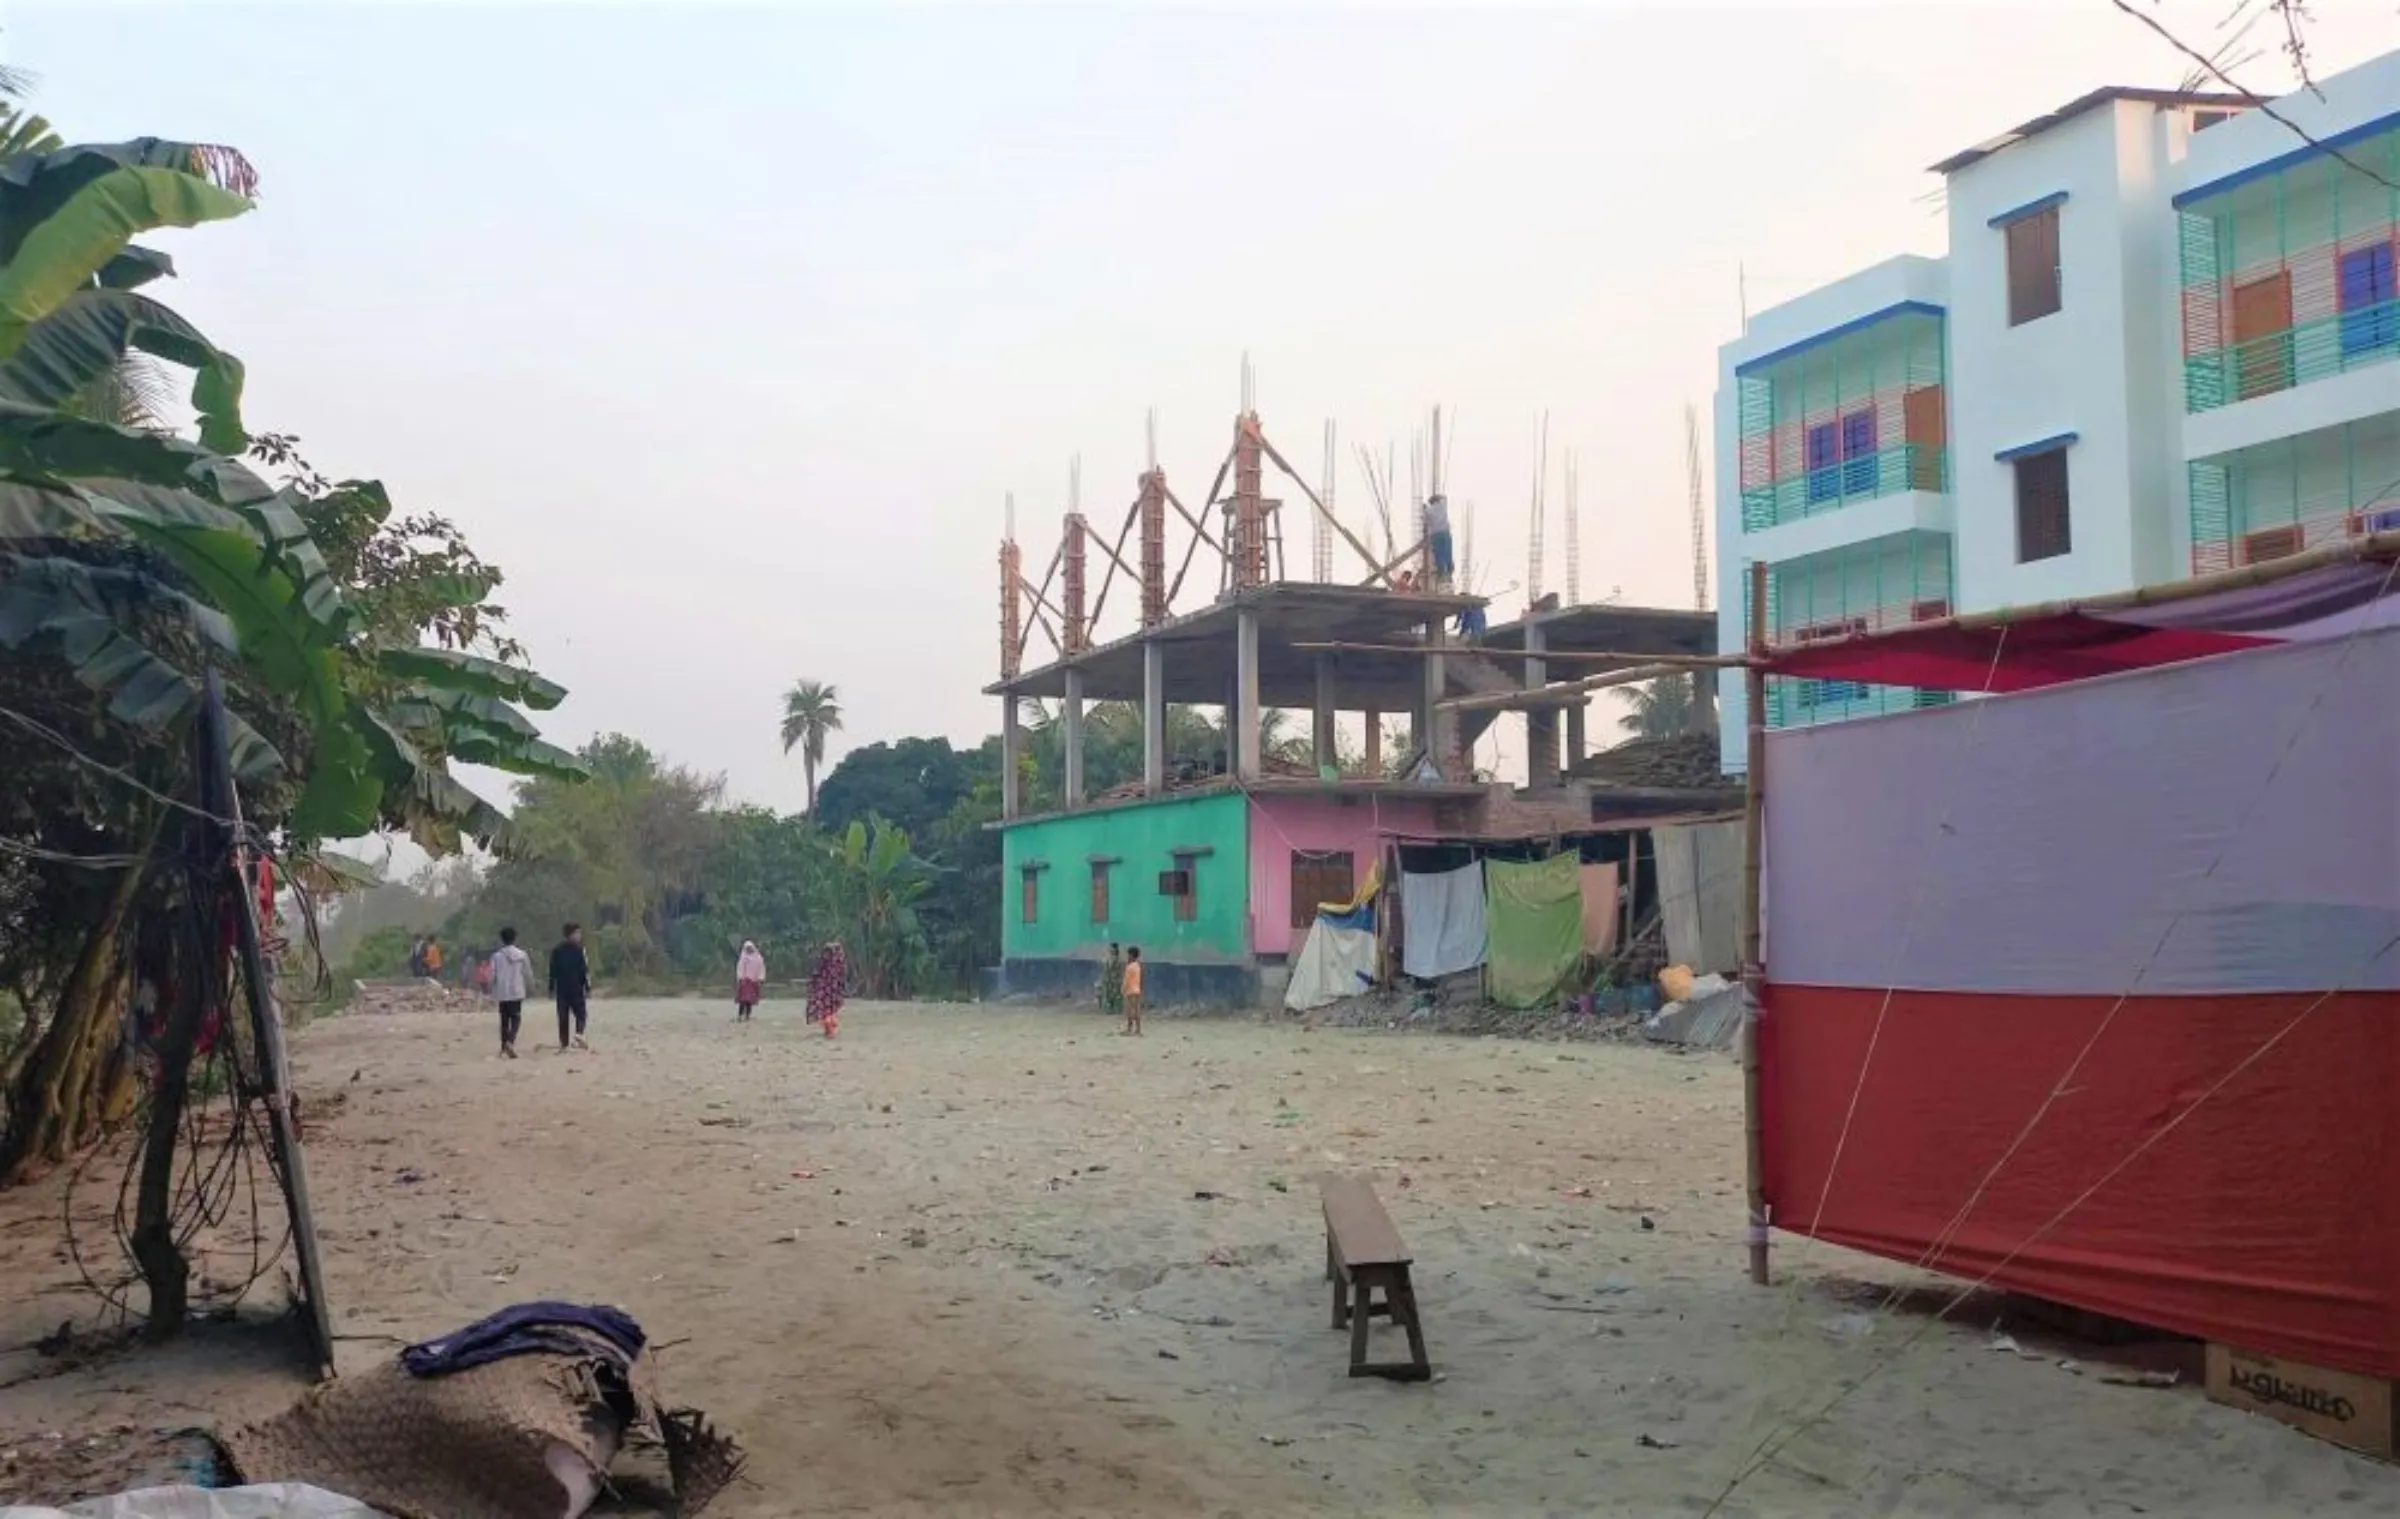 New buildings sprout up in the neighborhood near the economic zone in the context of bullish trends in the land market, Narayanganj, Bangladesh, January 11, 2023, Thomson Reuters Foundation/ Md. Tahmid Zami